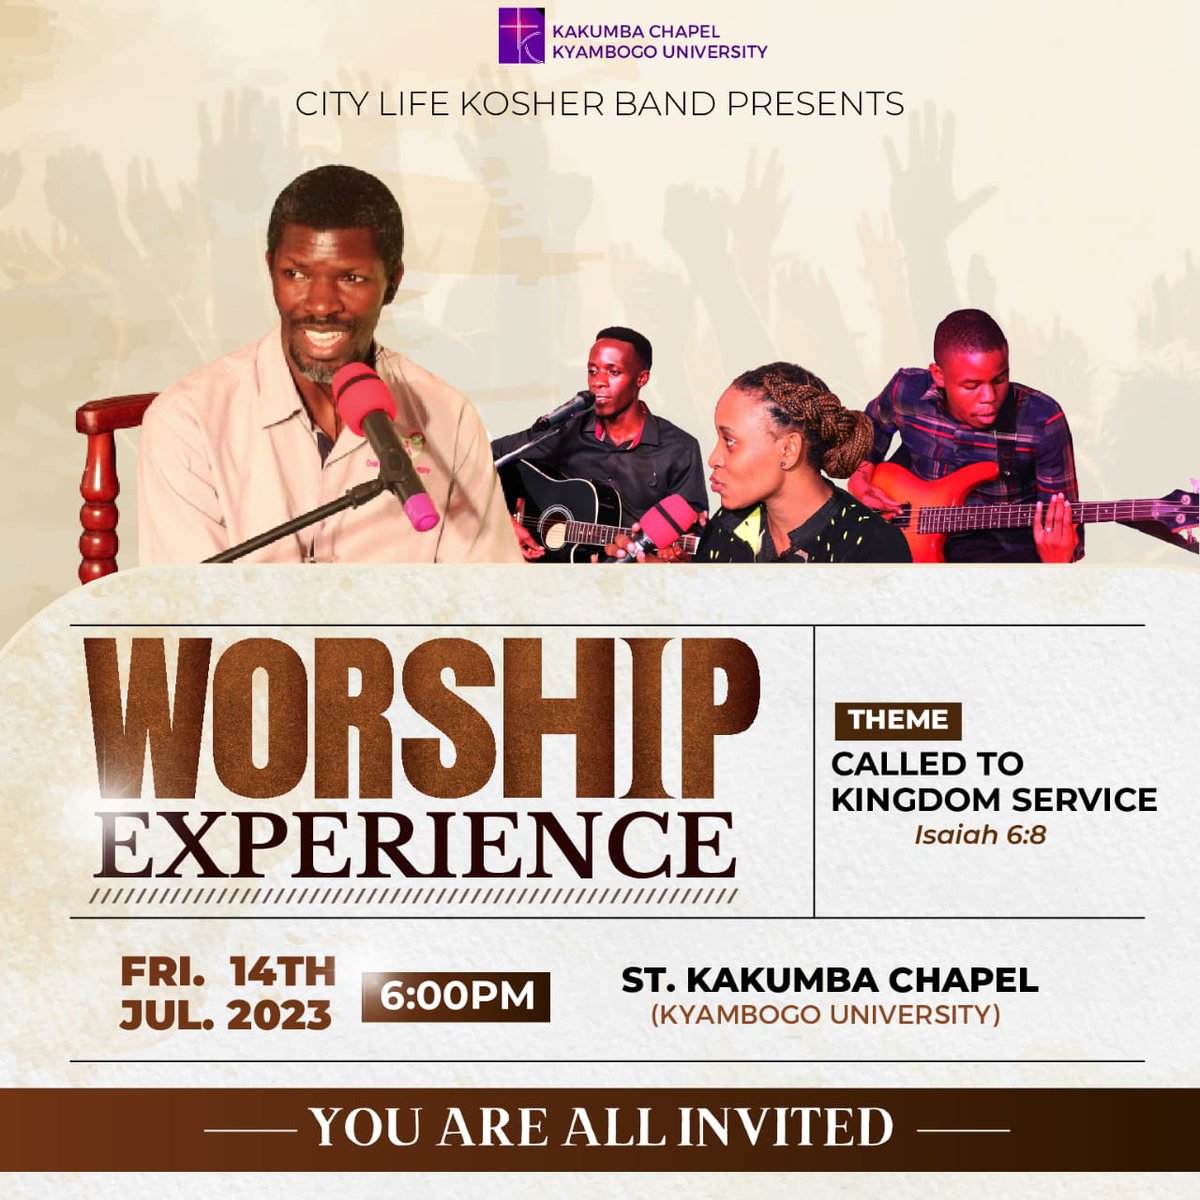 Kind reminder about the Worship Experience this Friday 14th July, 2023. Do not miss the powerful worship with City Life Kosher Cell